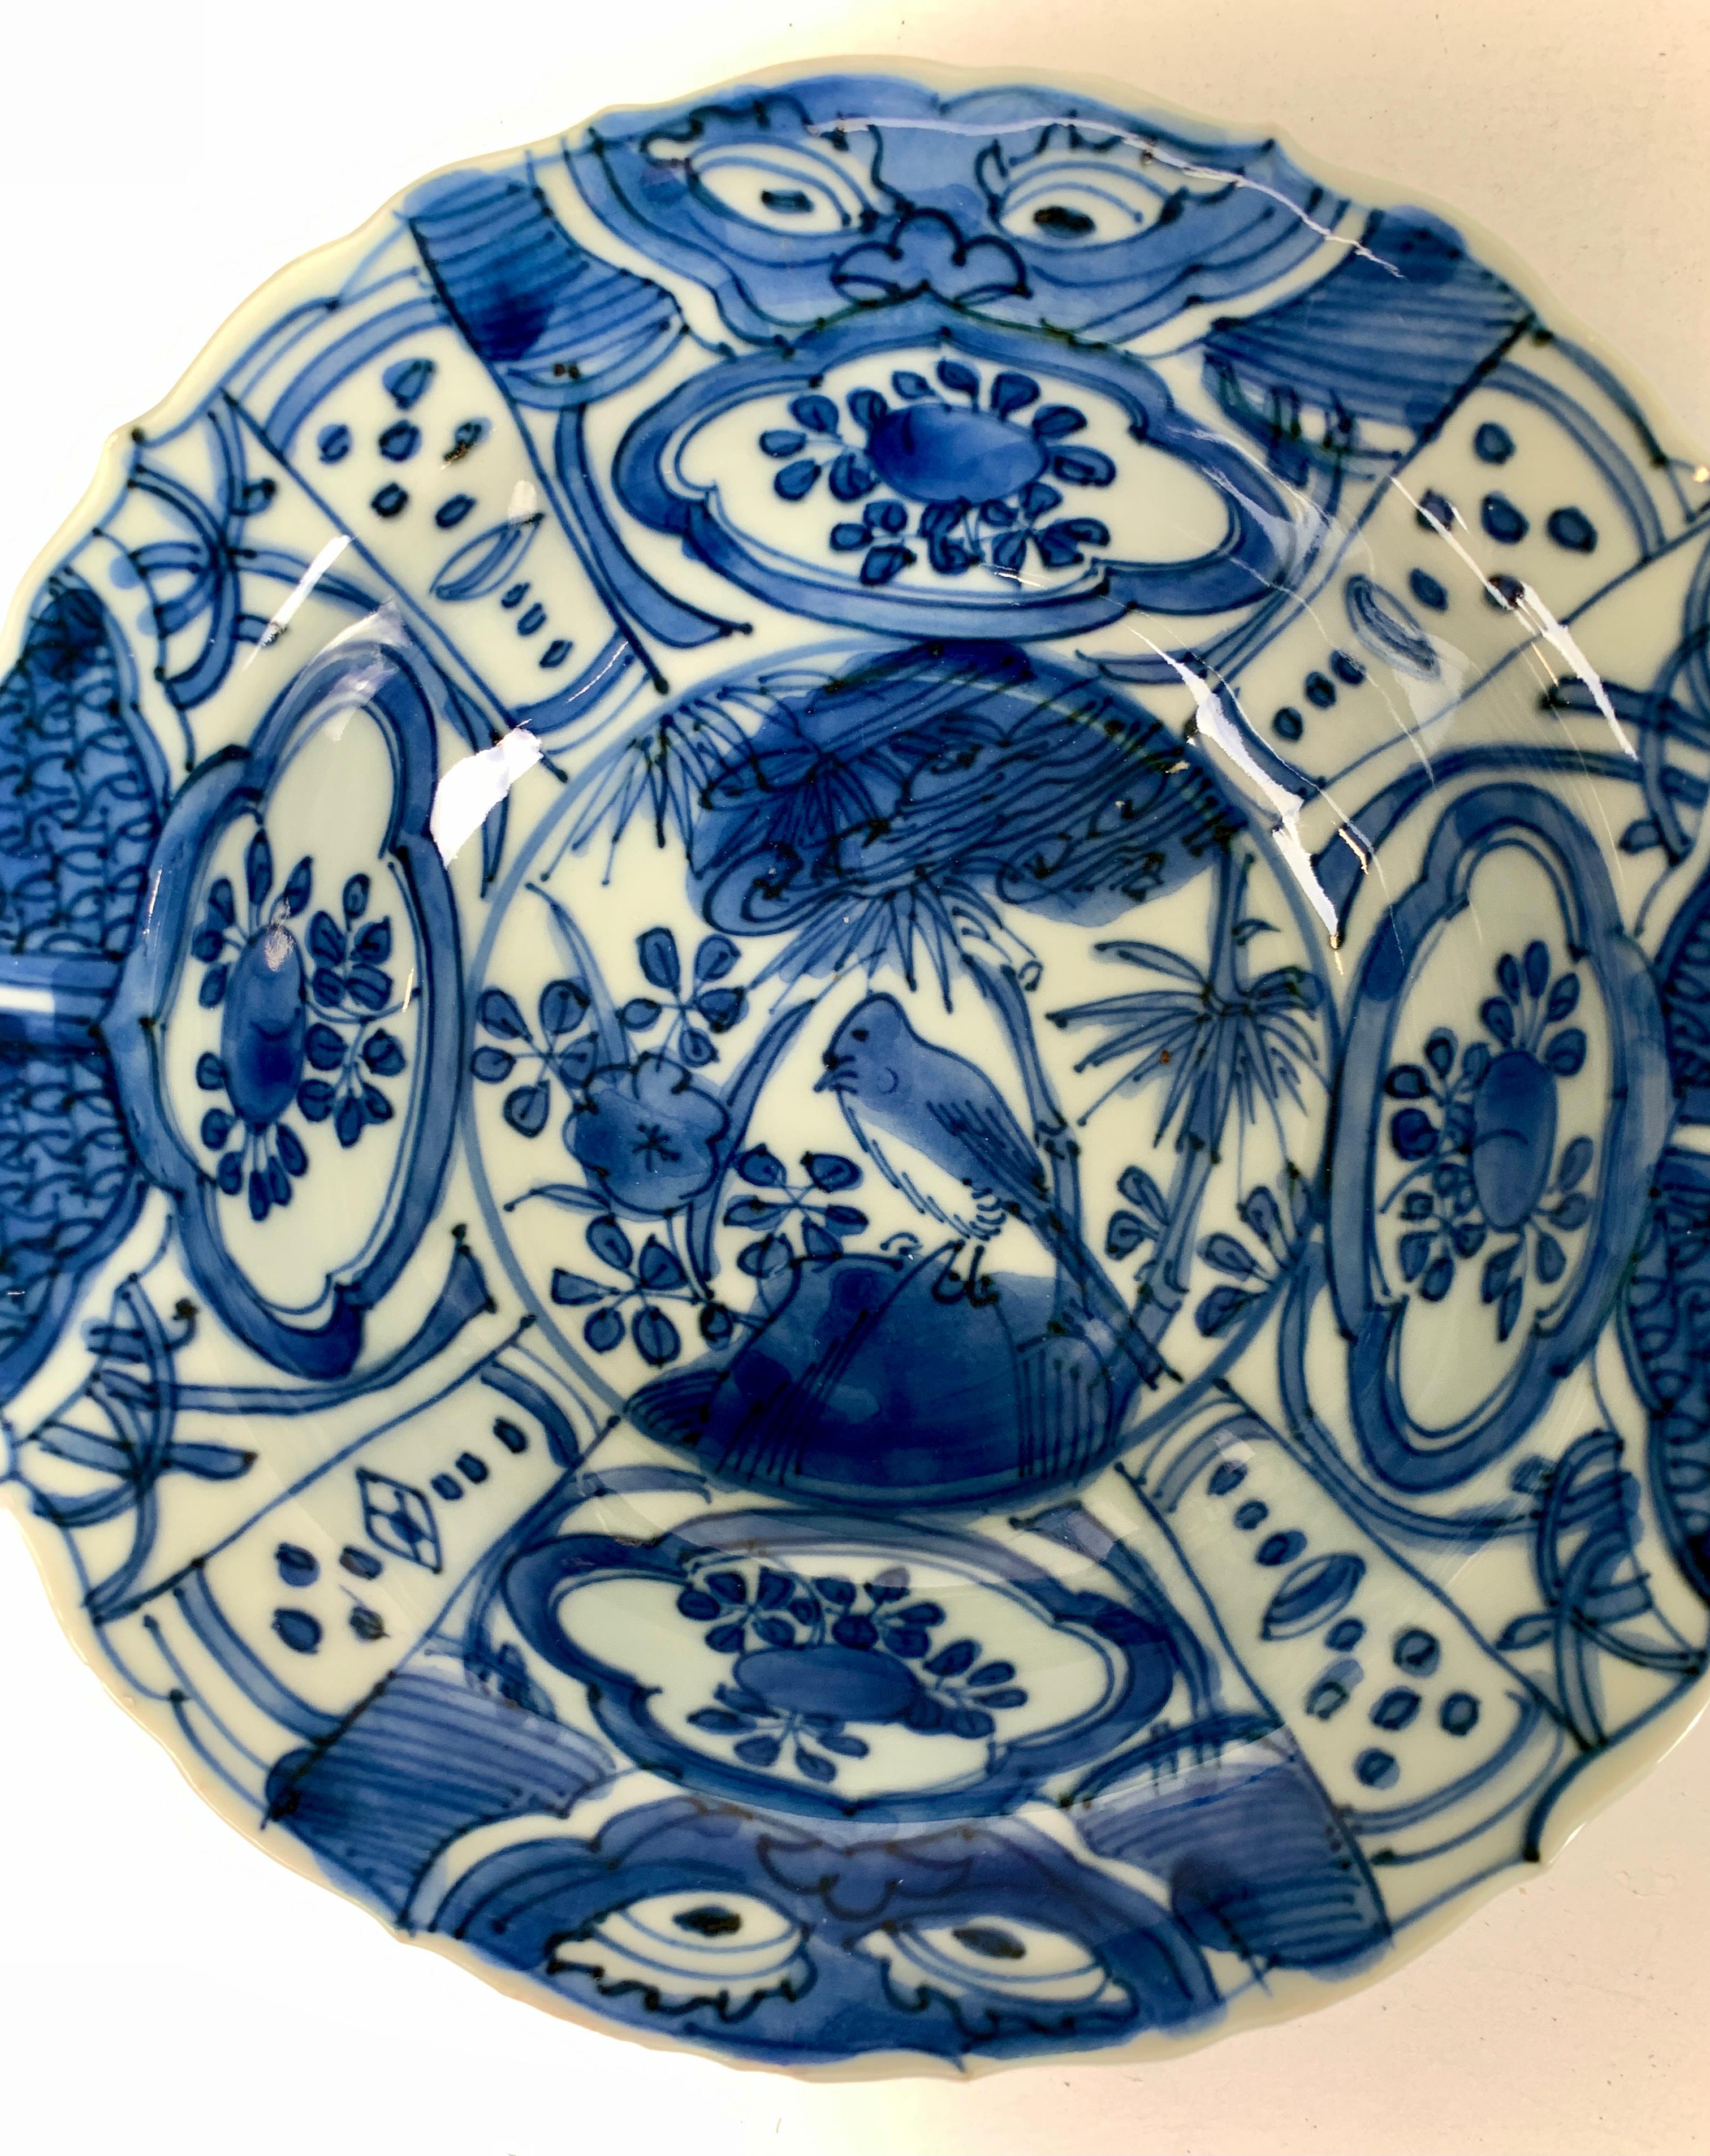 Hand-Painted Blue and White Bowl Chinese Porcelain Kraak Made for Export c-1700 Kangxi Period